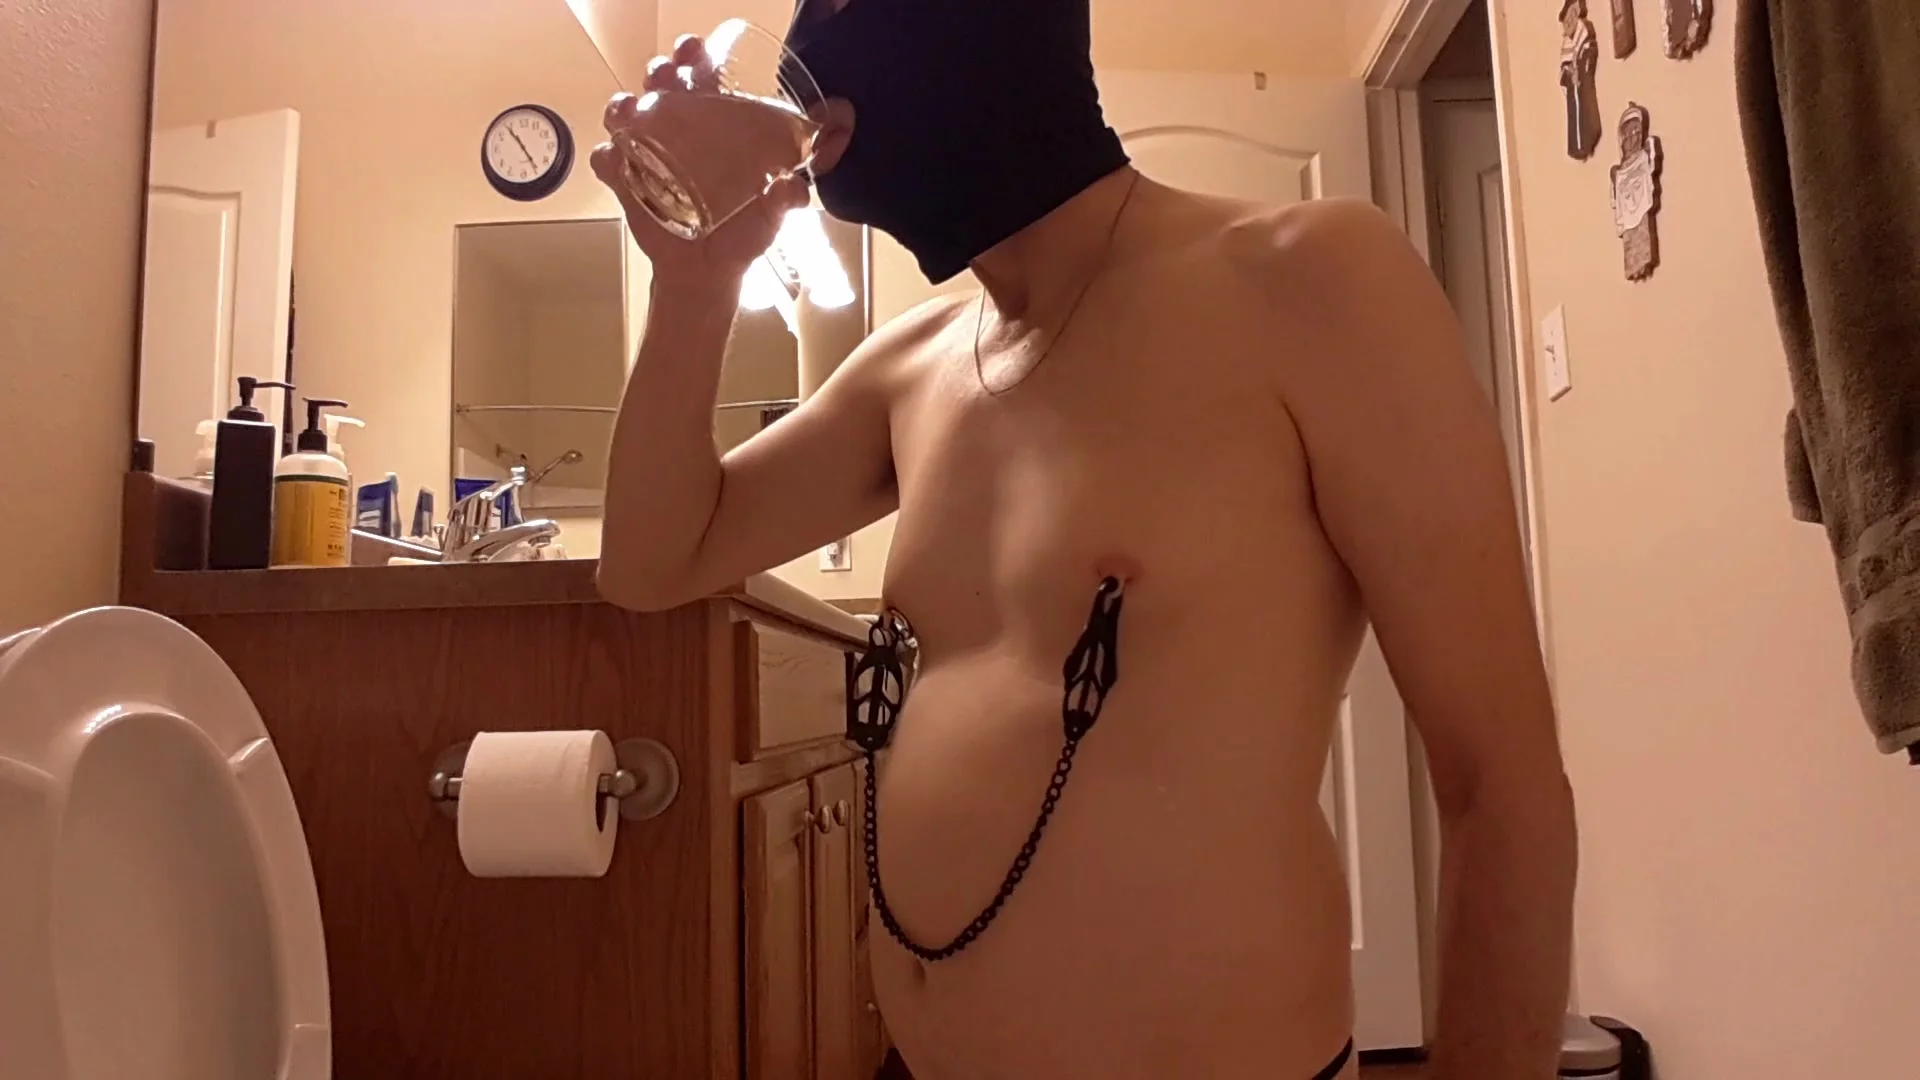 Slave Drinking Piss From Toilet ThisVidcom